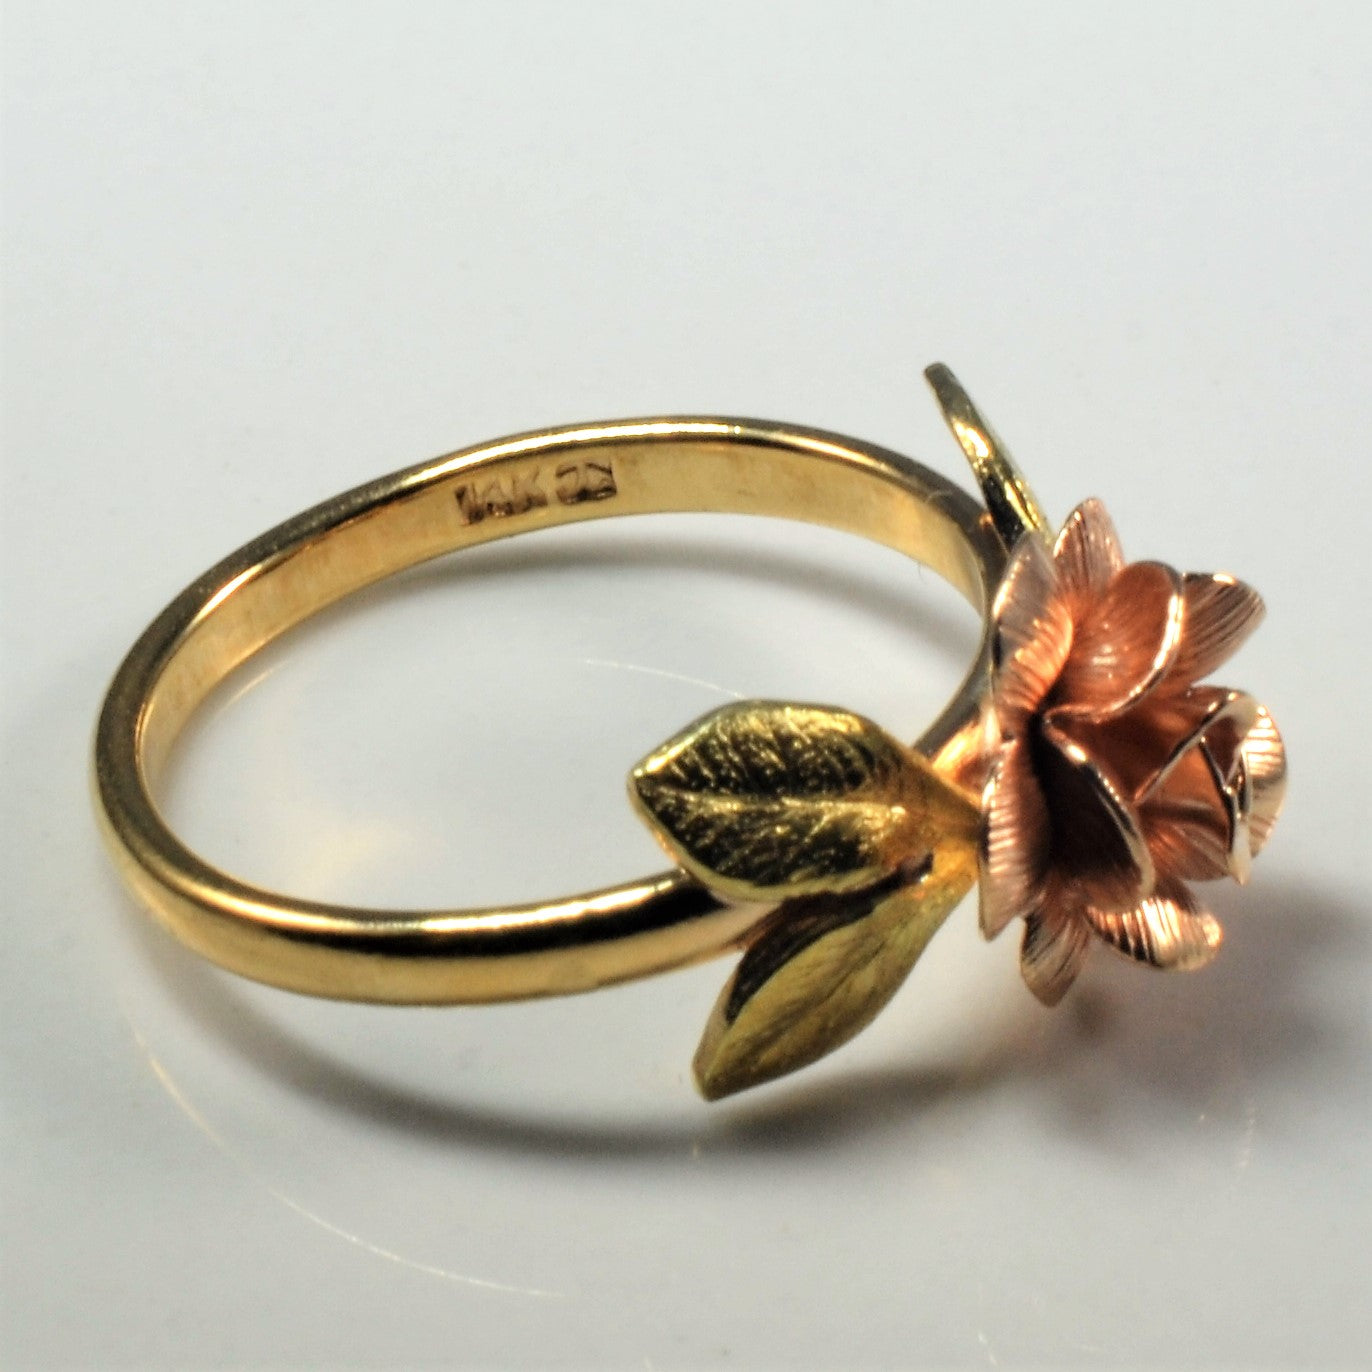 Two Tone Gold Rose Ring | SZ 5.75 |